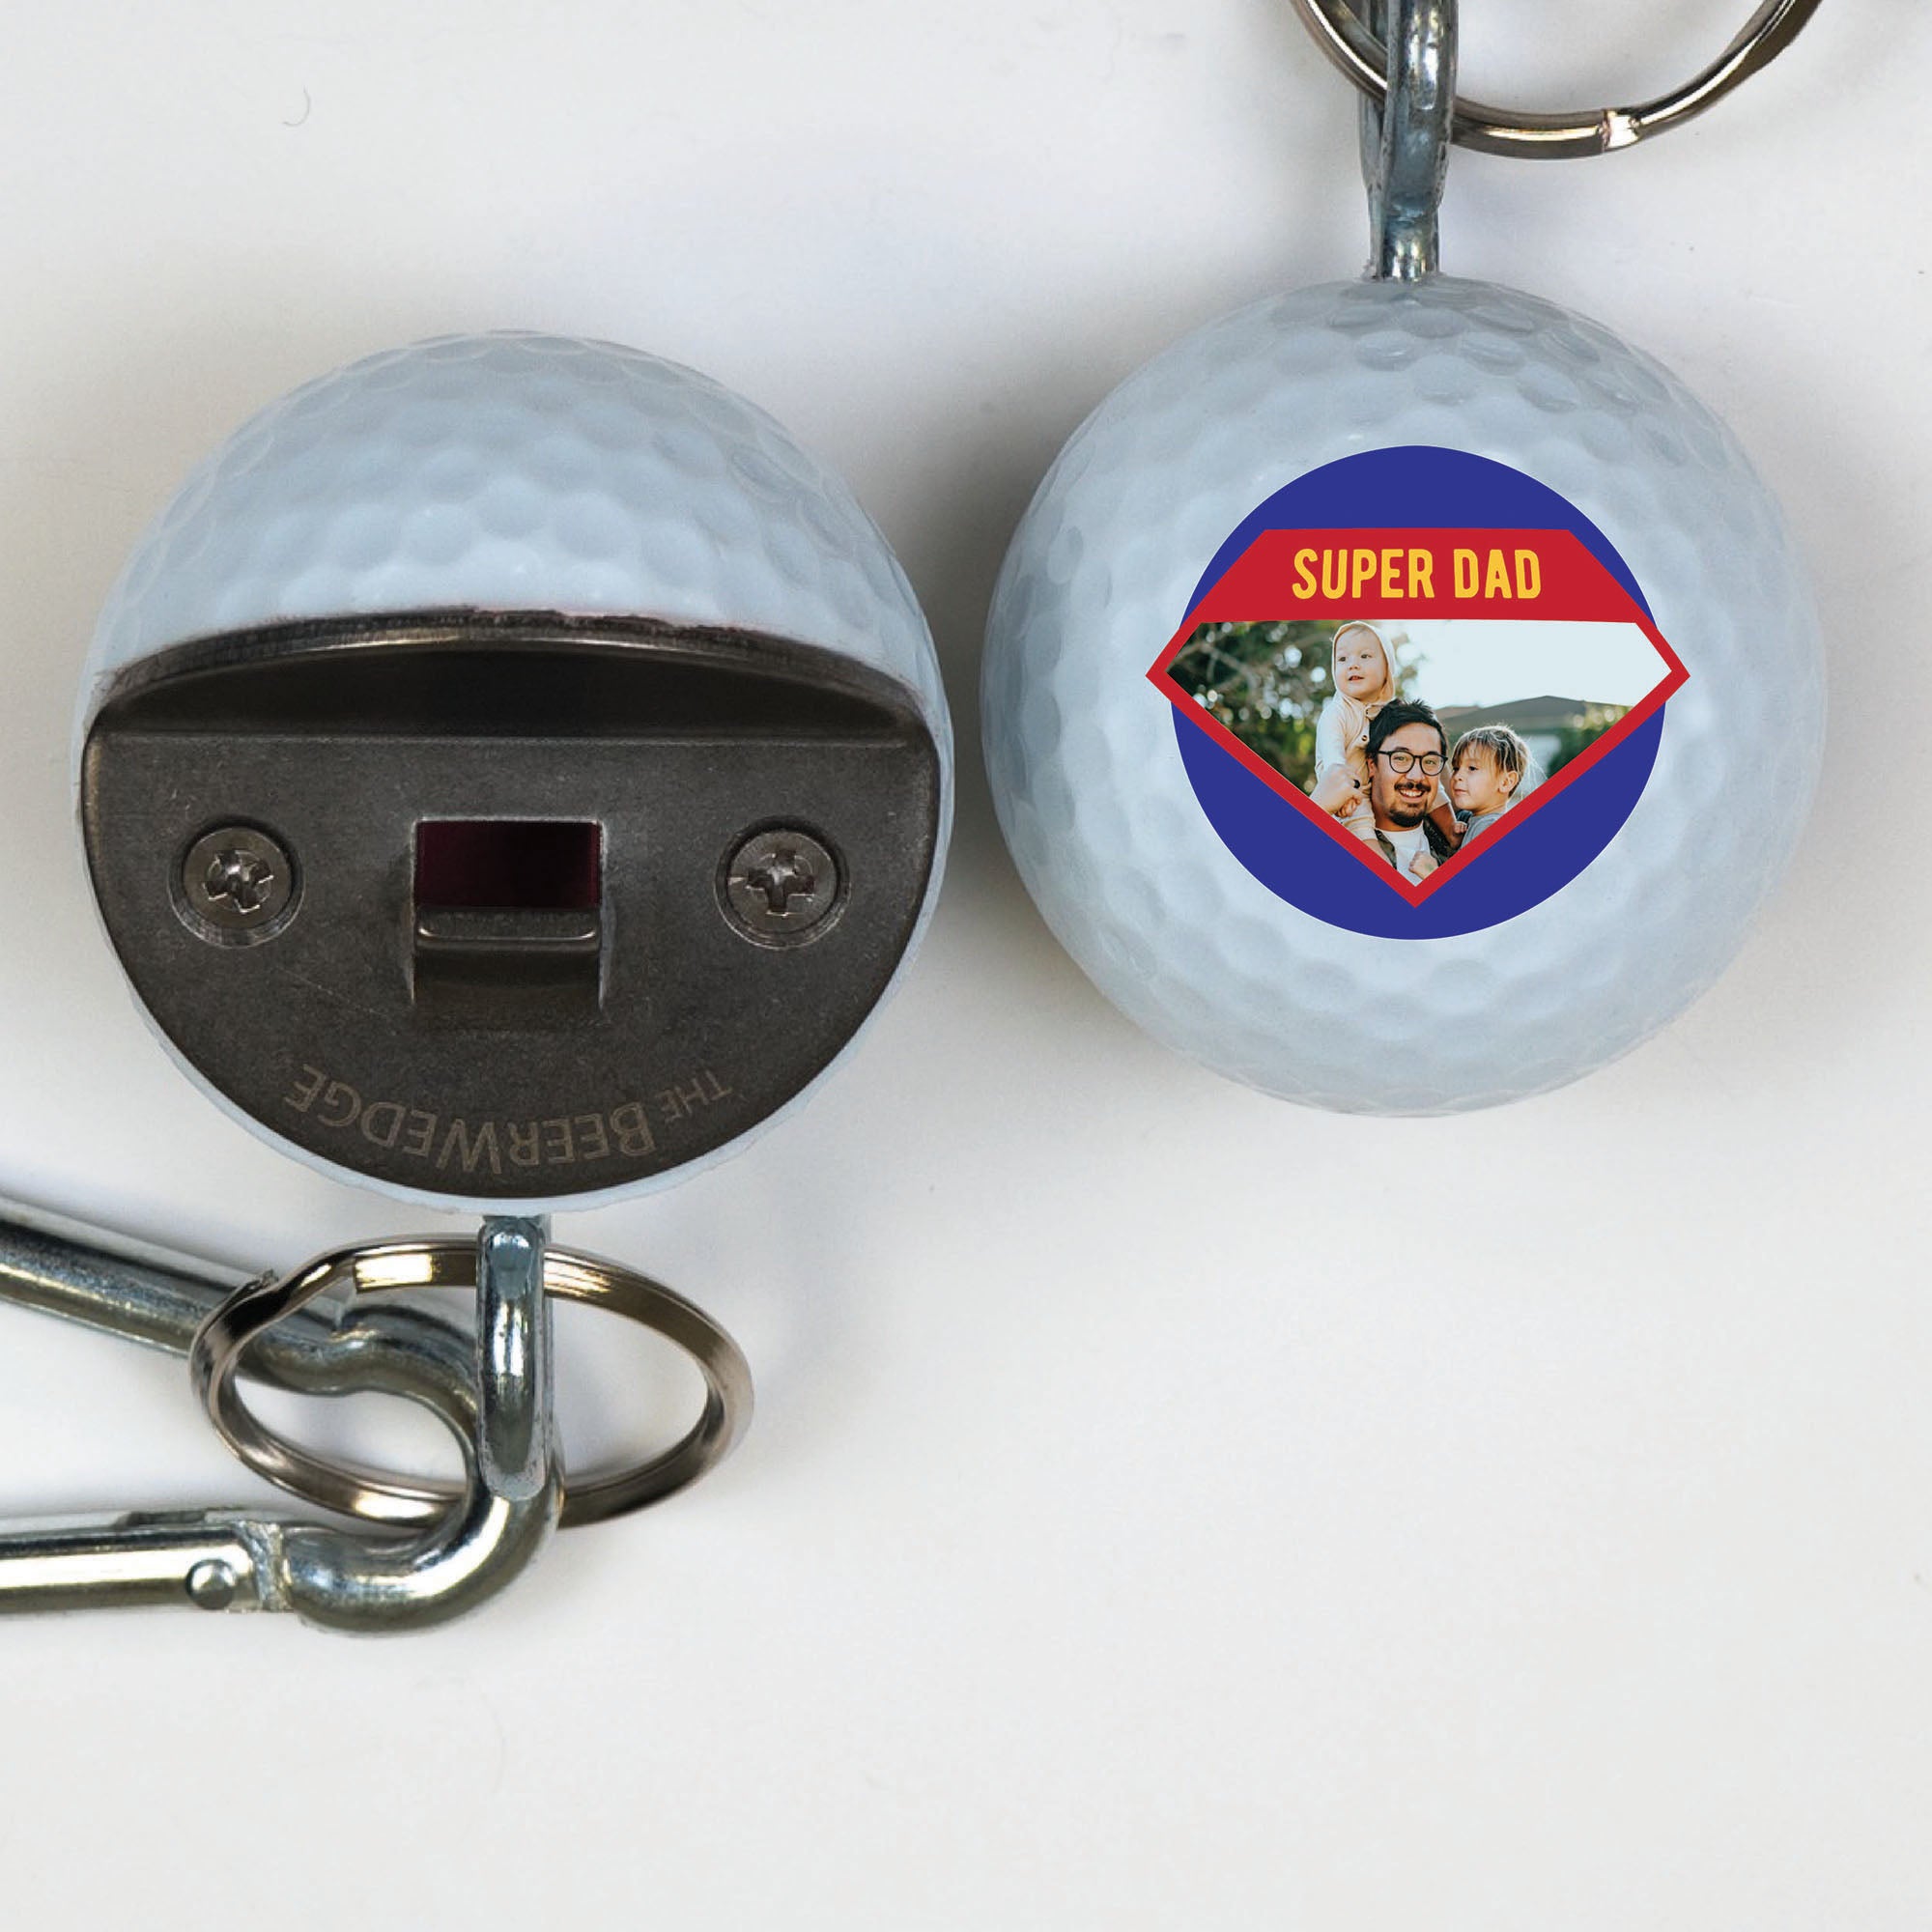 Golf Ball Bottle Opener, Dad & Father's Day Gifts